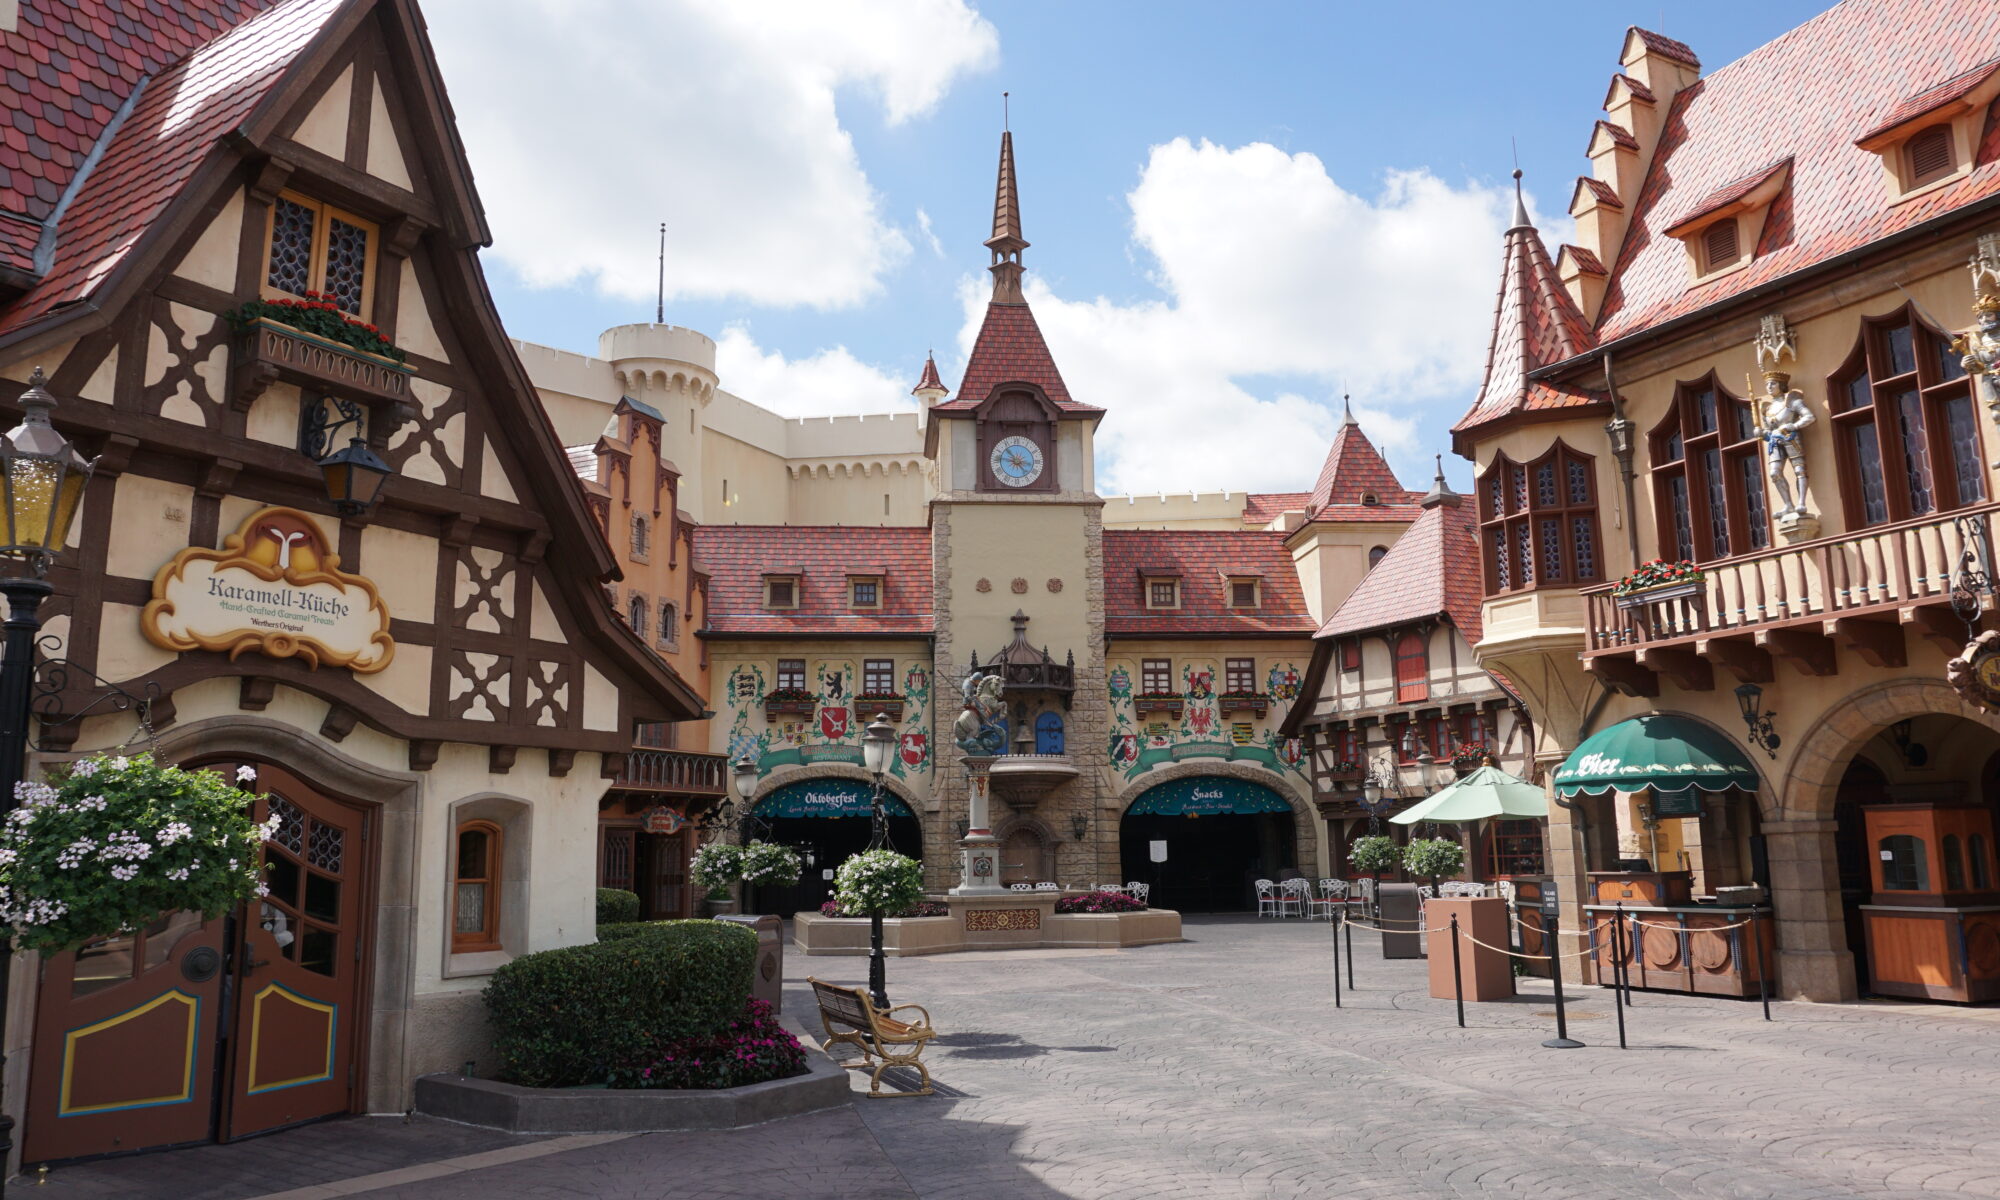 Germany Pavilion in Epcot